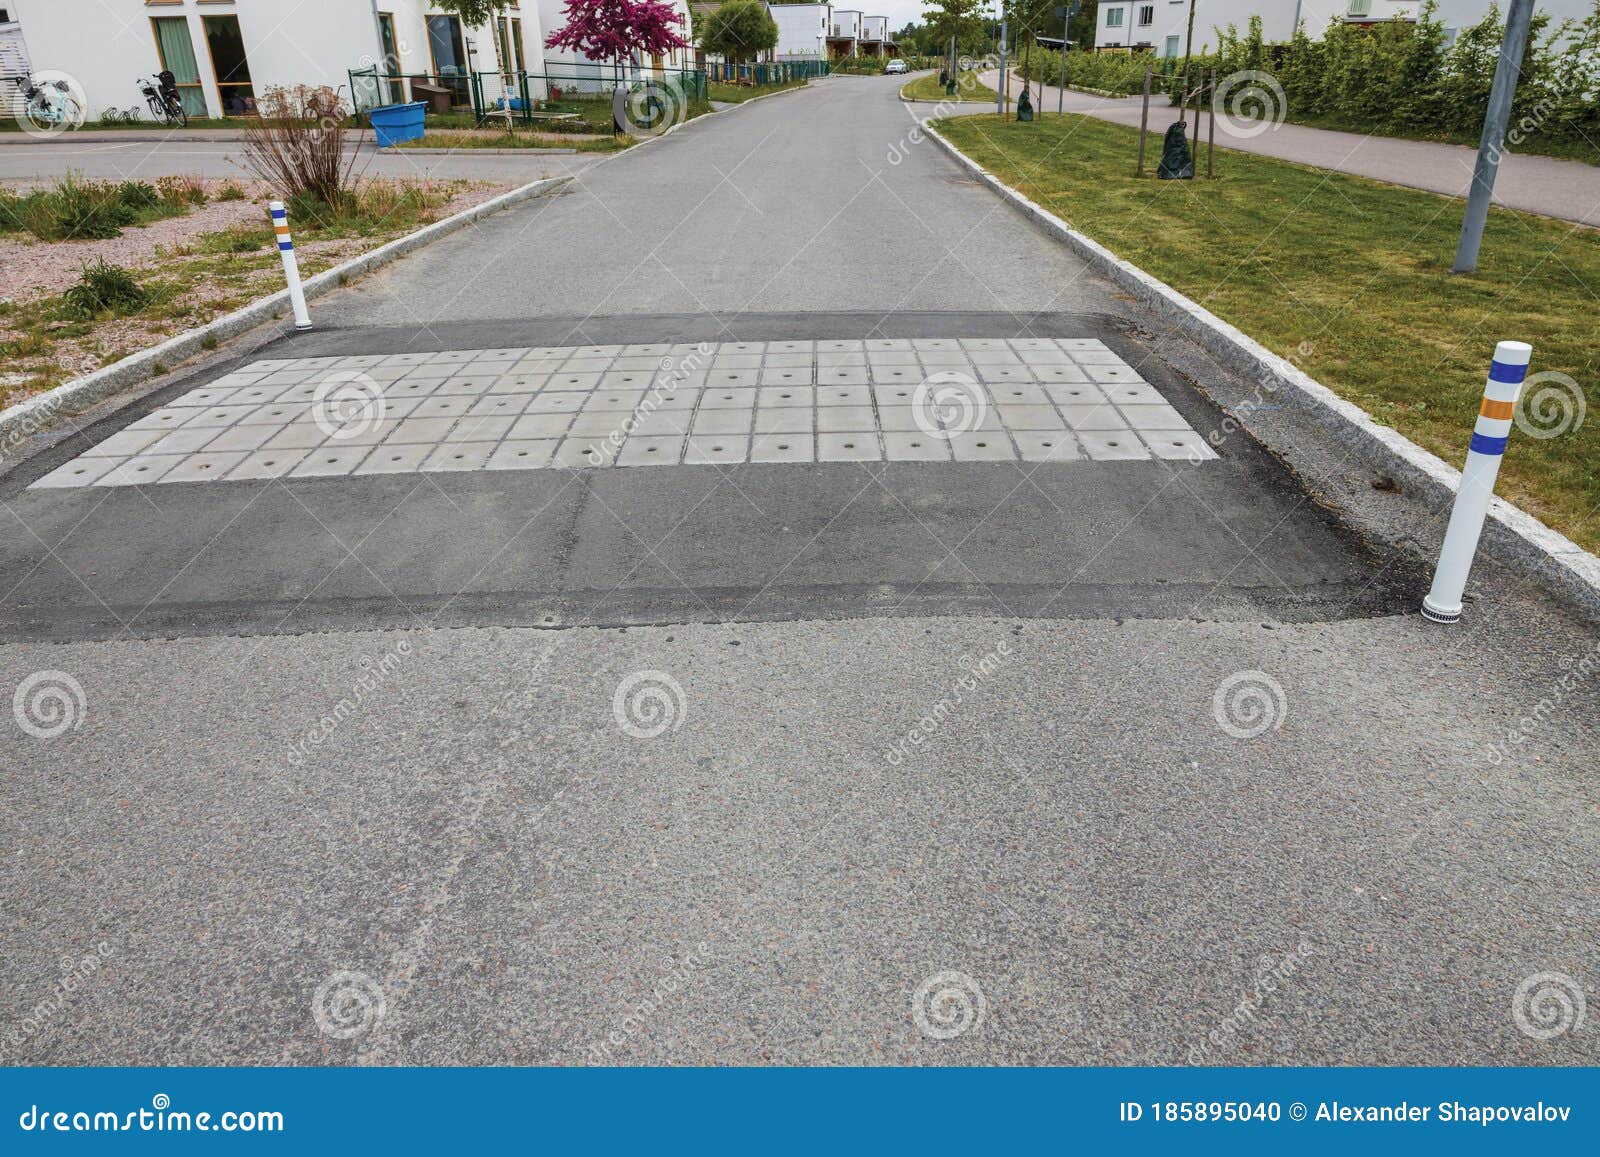 Close Up View of Speed Bump on Village Street Road. Landscape View ...